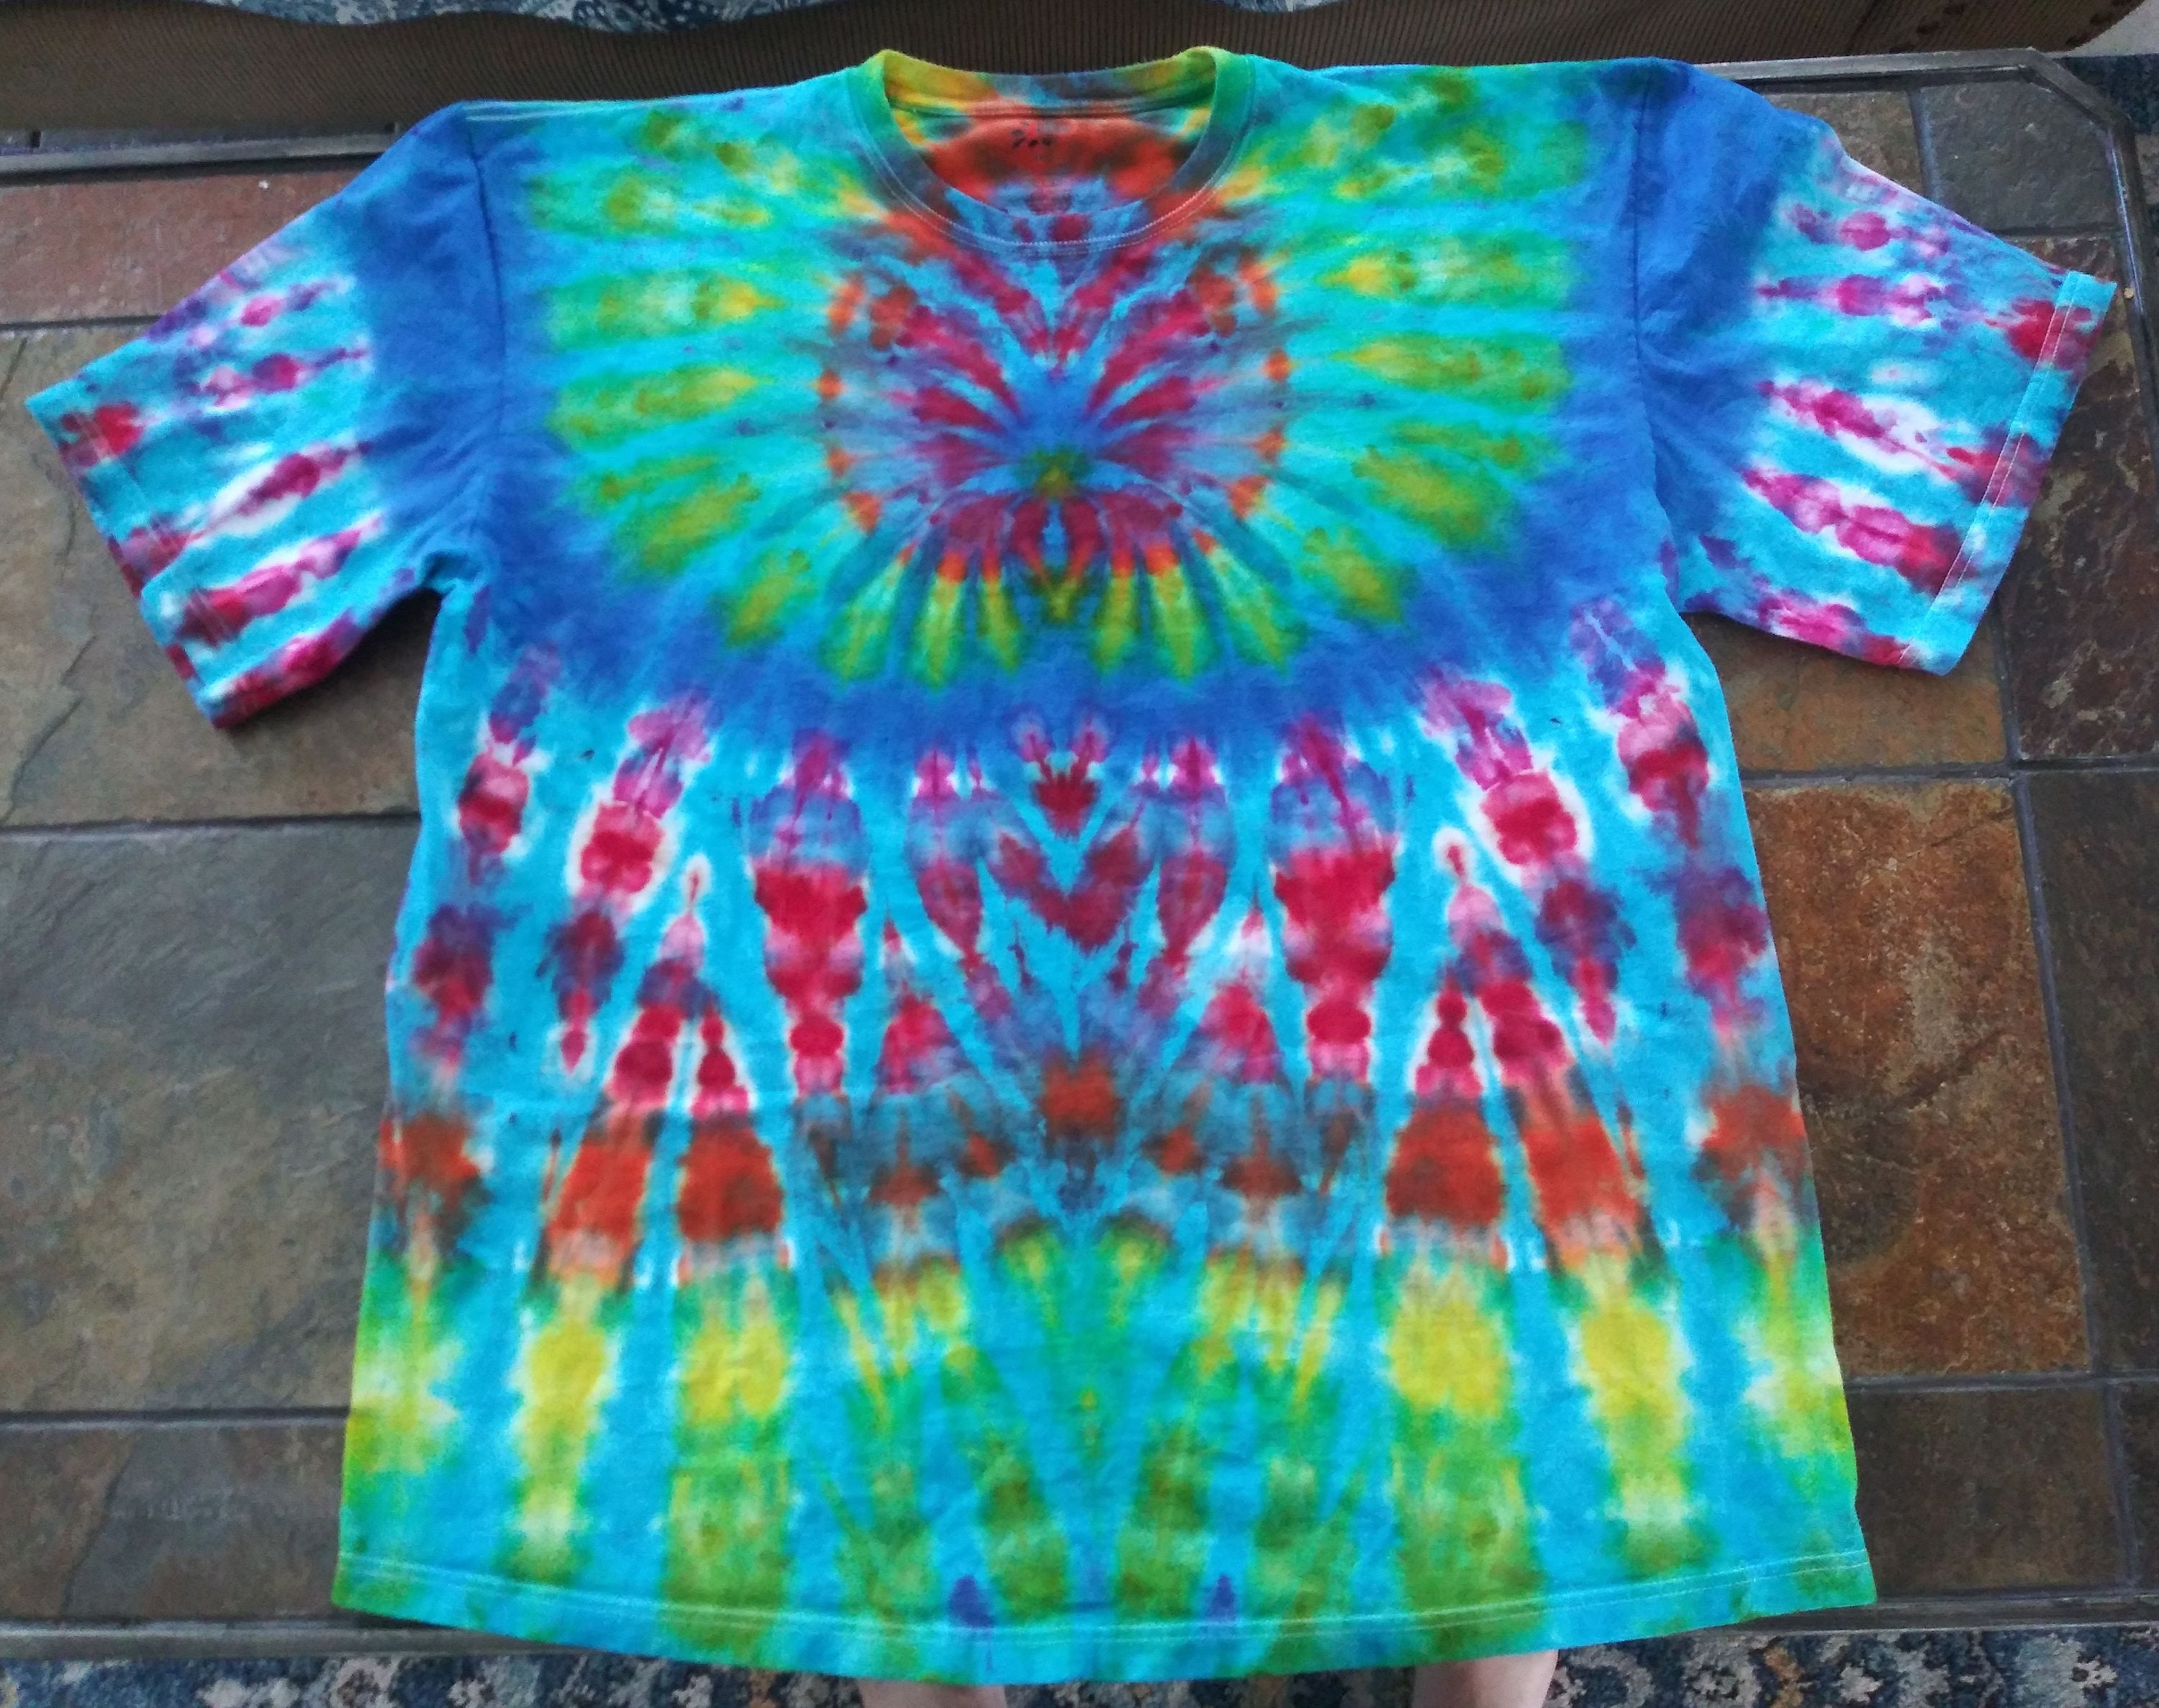 Home made tie dye shirt 4XL psychedelic color spectrum art | Etsy